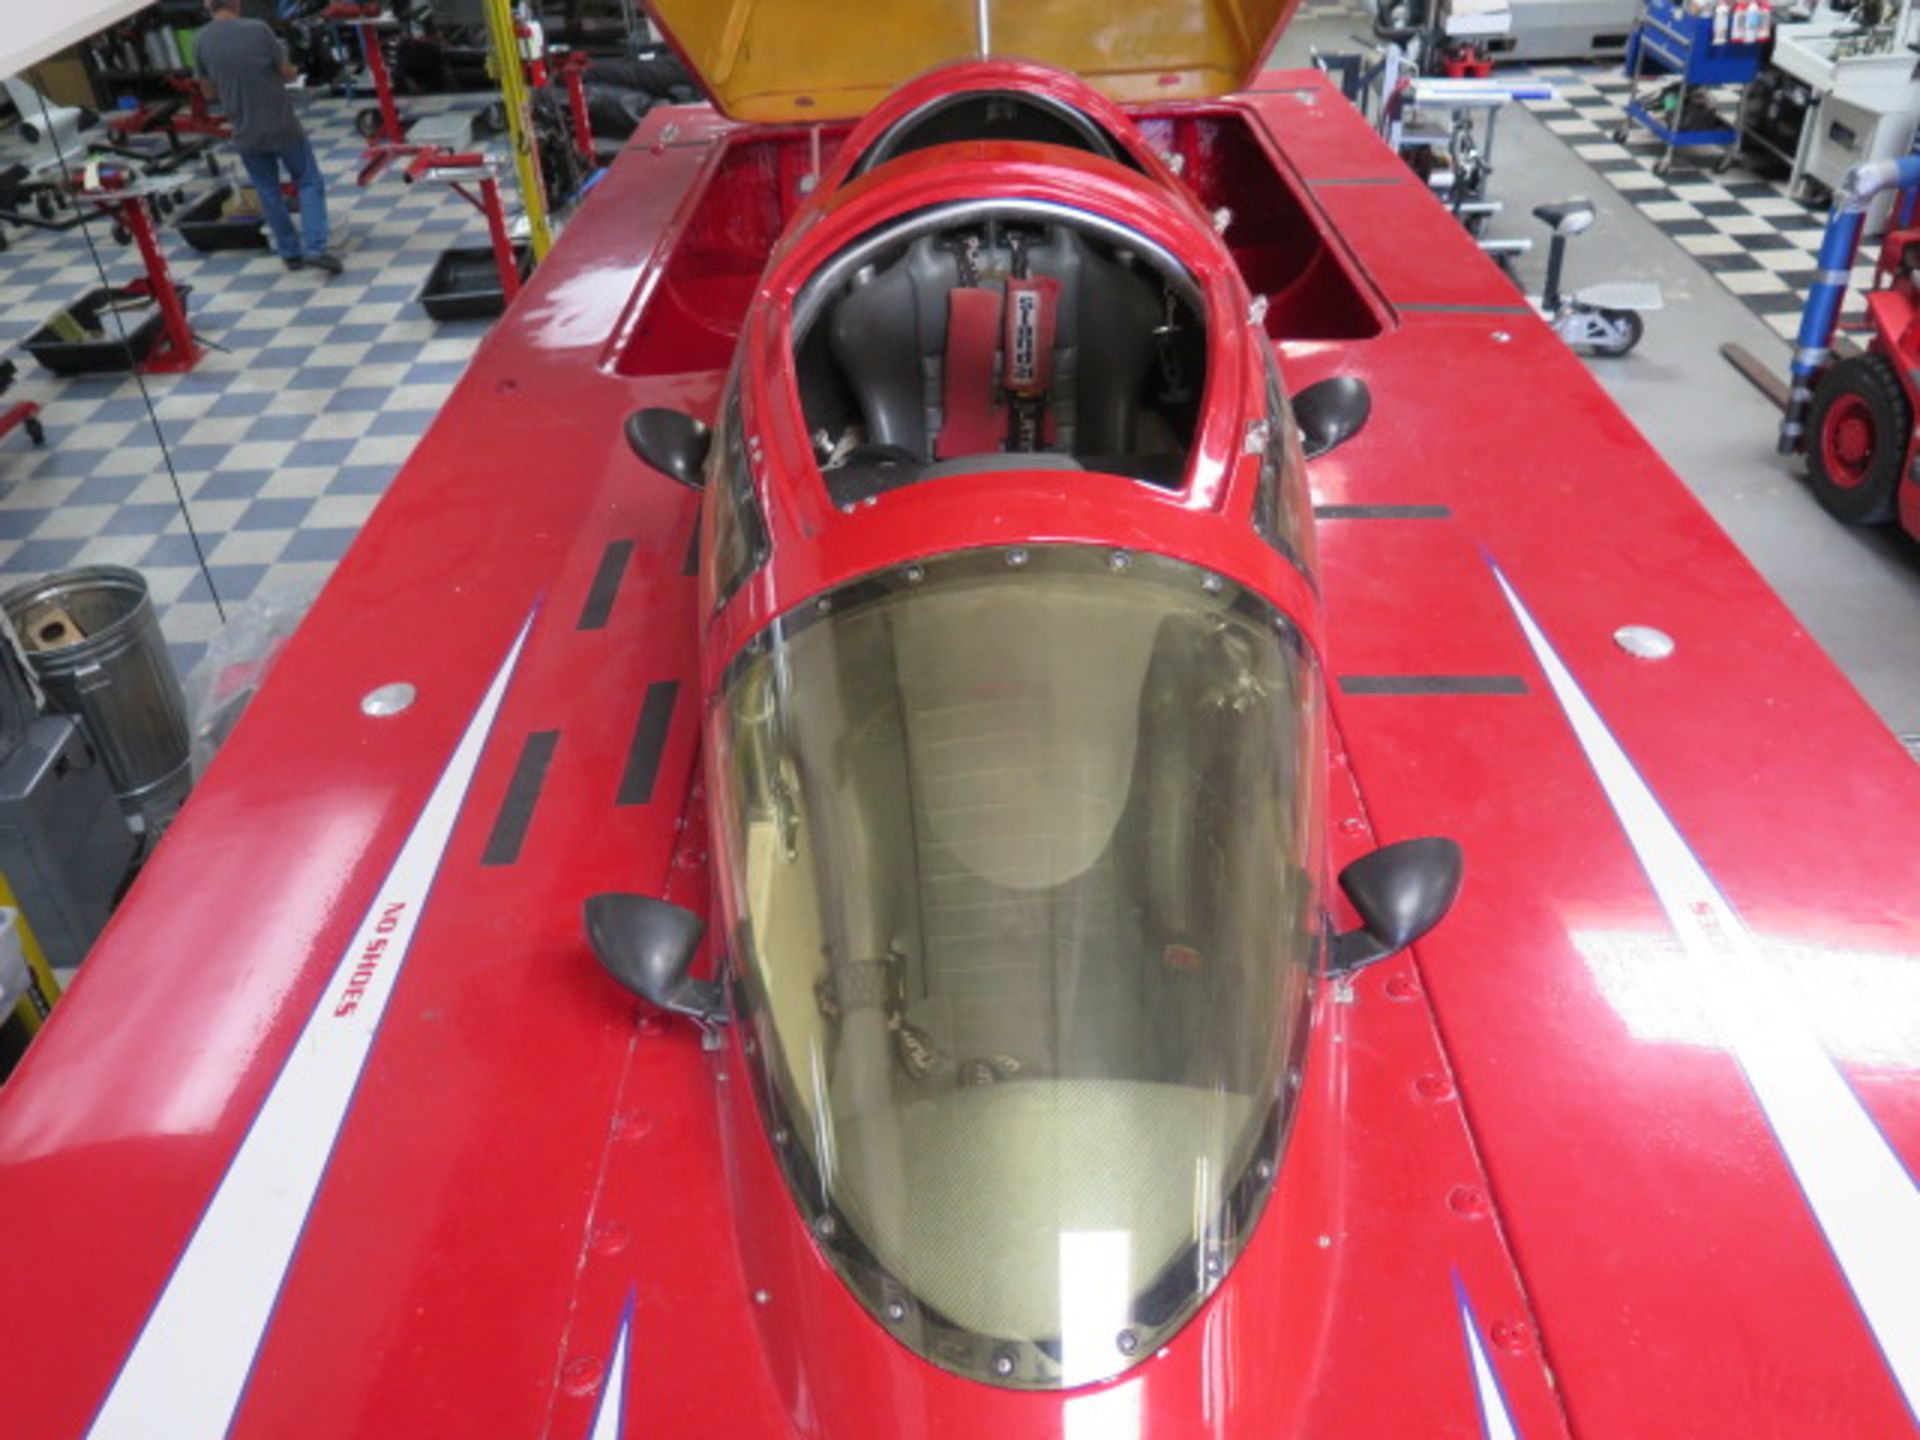 42’ Fountain Super V Race Boat w/ Fill Canopy (Former Worlds Fastest Super V Hull)142.3, SOLD AS IS - Image 27 of 37